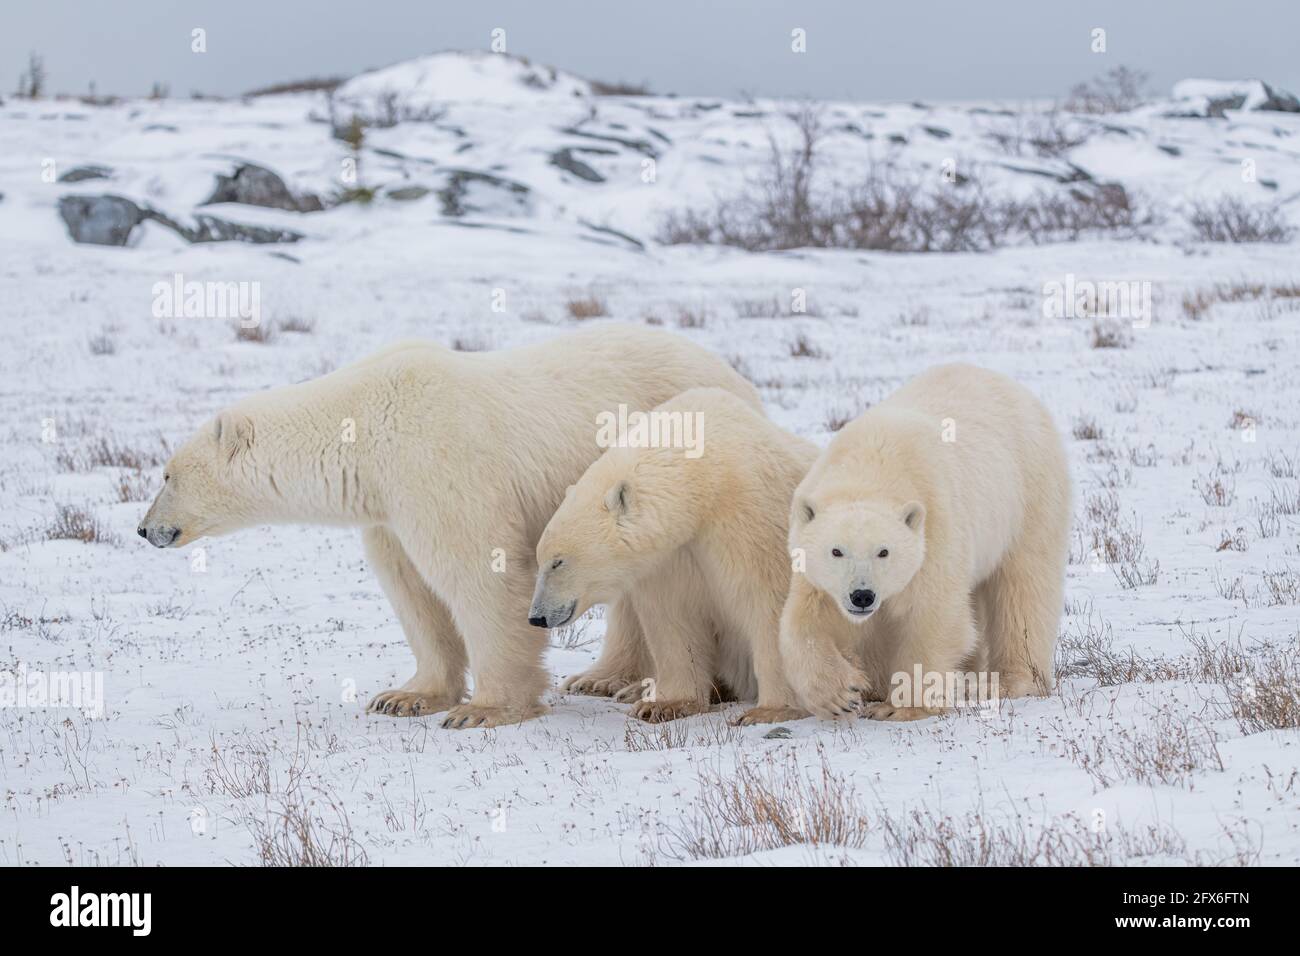 Three polar bears with mom and two cubs, one yearling baby starting to walk directly towards the camera. Snowy landscape, white tundra background. Stock Photo